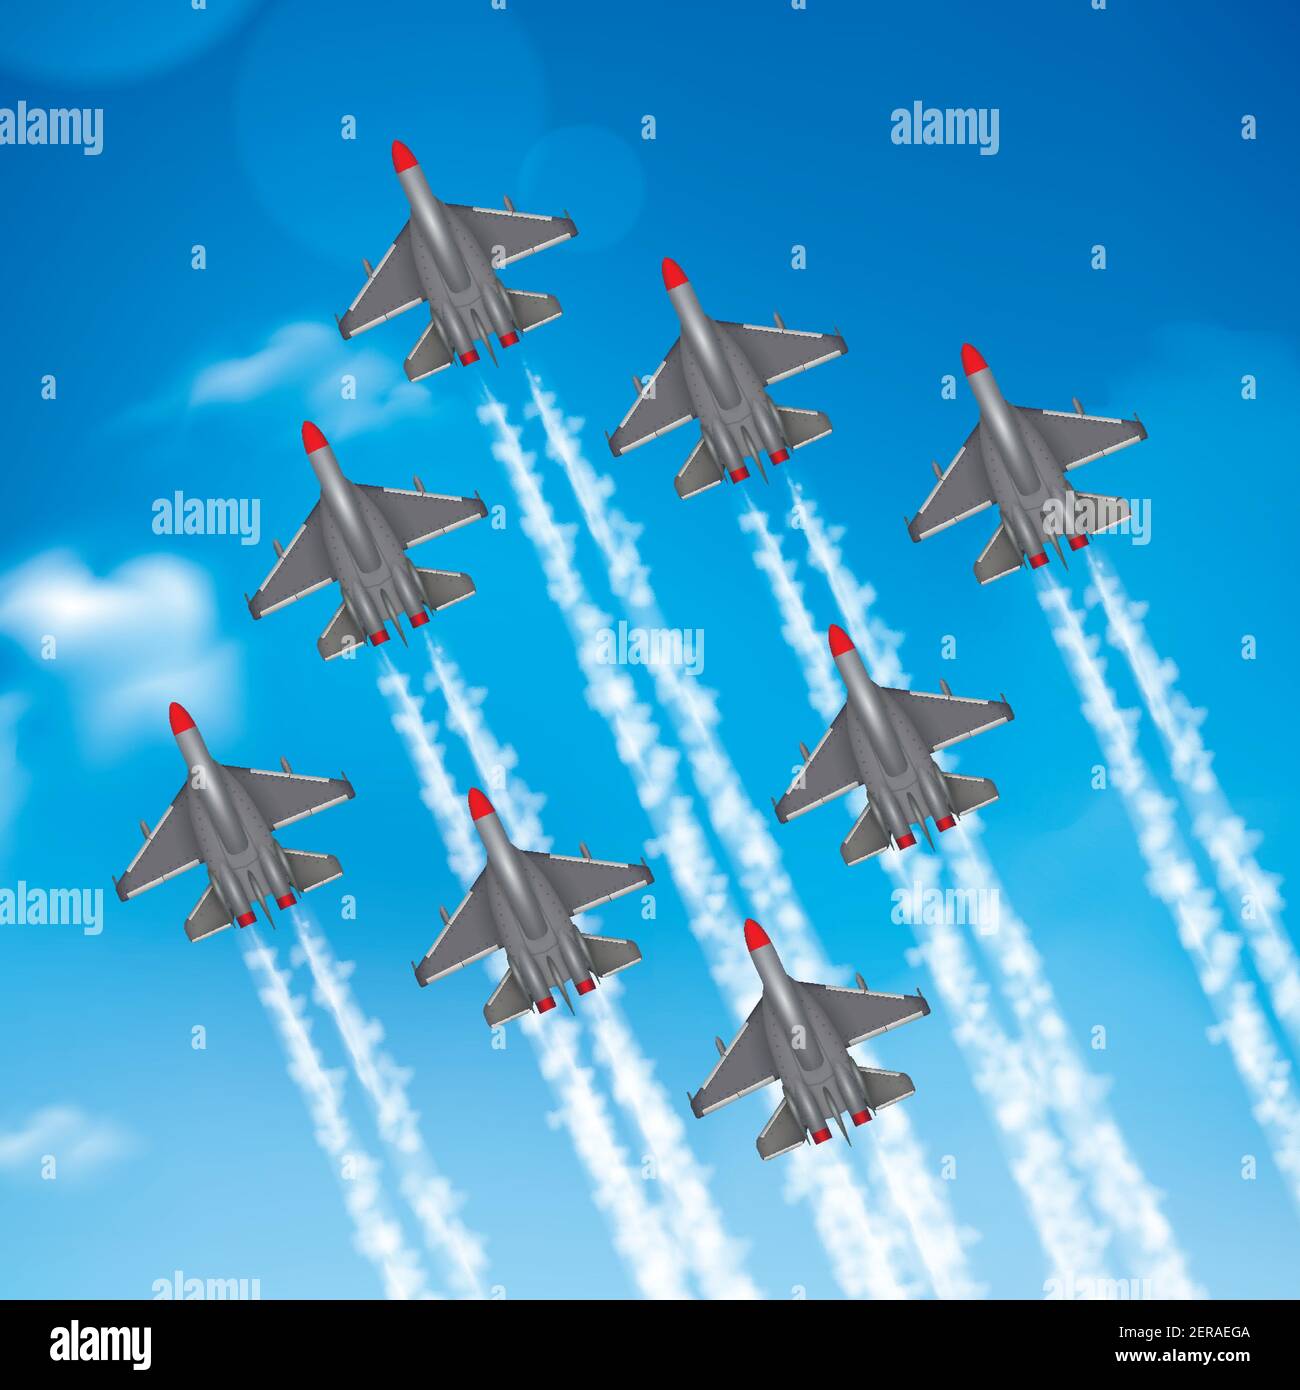 Army air force military parade jet airplanes formation condensation trails against blue sky realistic poster vector illustration Stock Vector